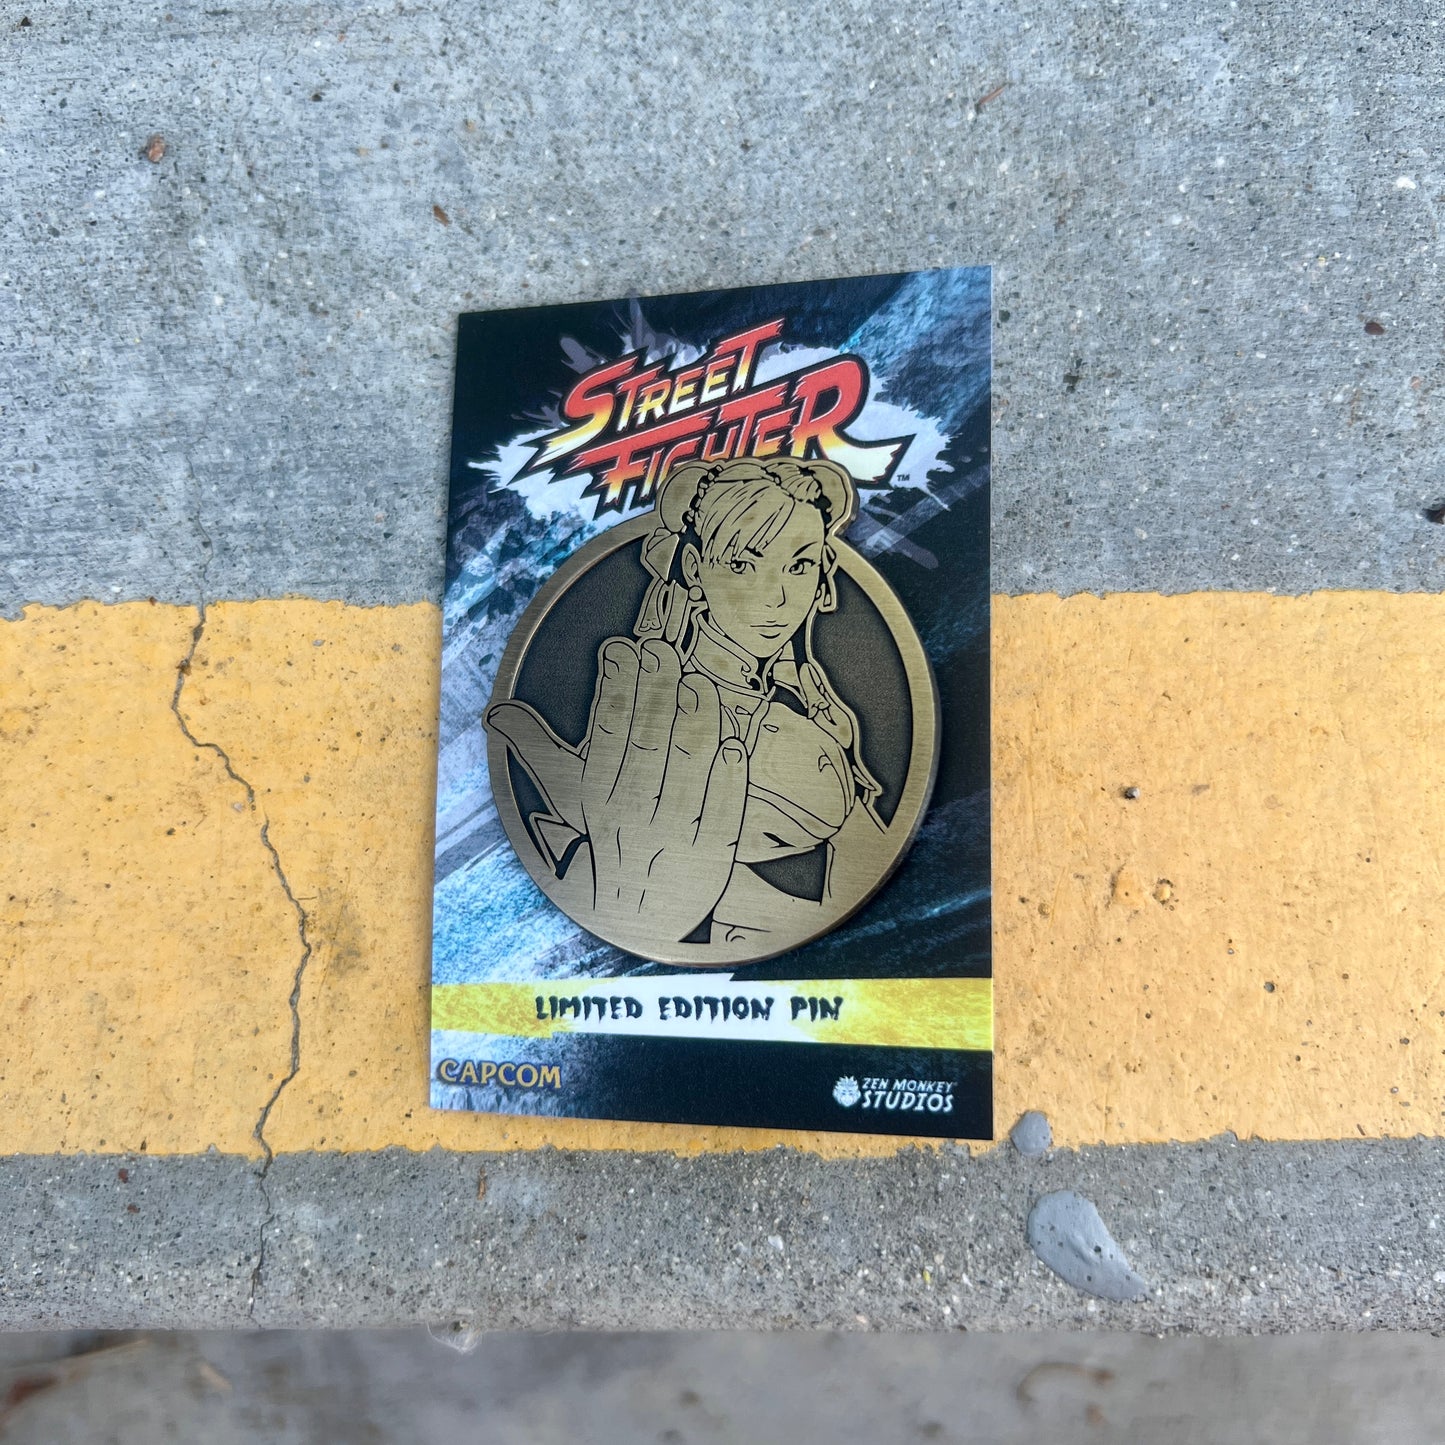 Street Fighter Emblem Collectible Pin